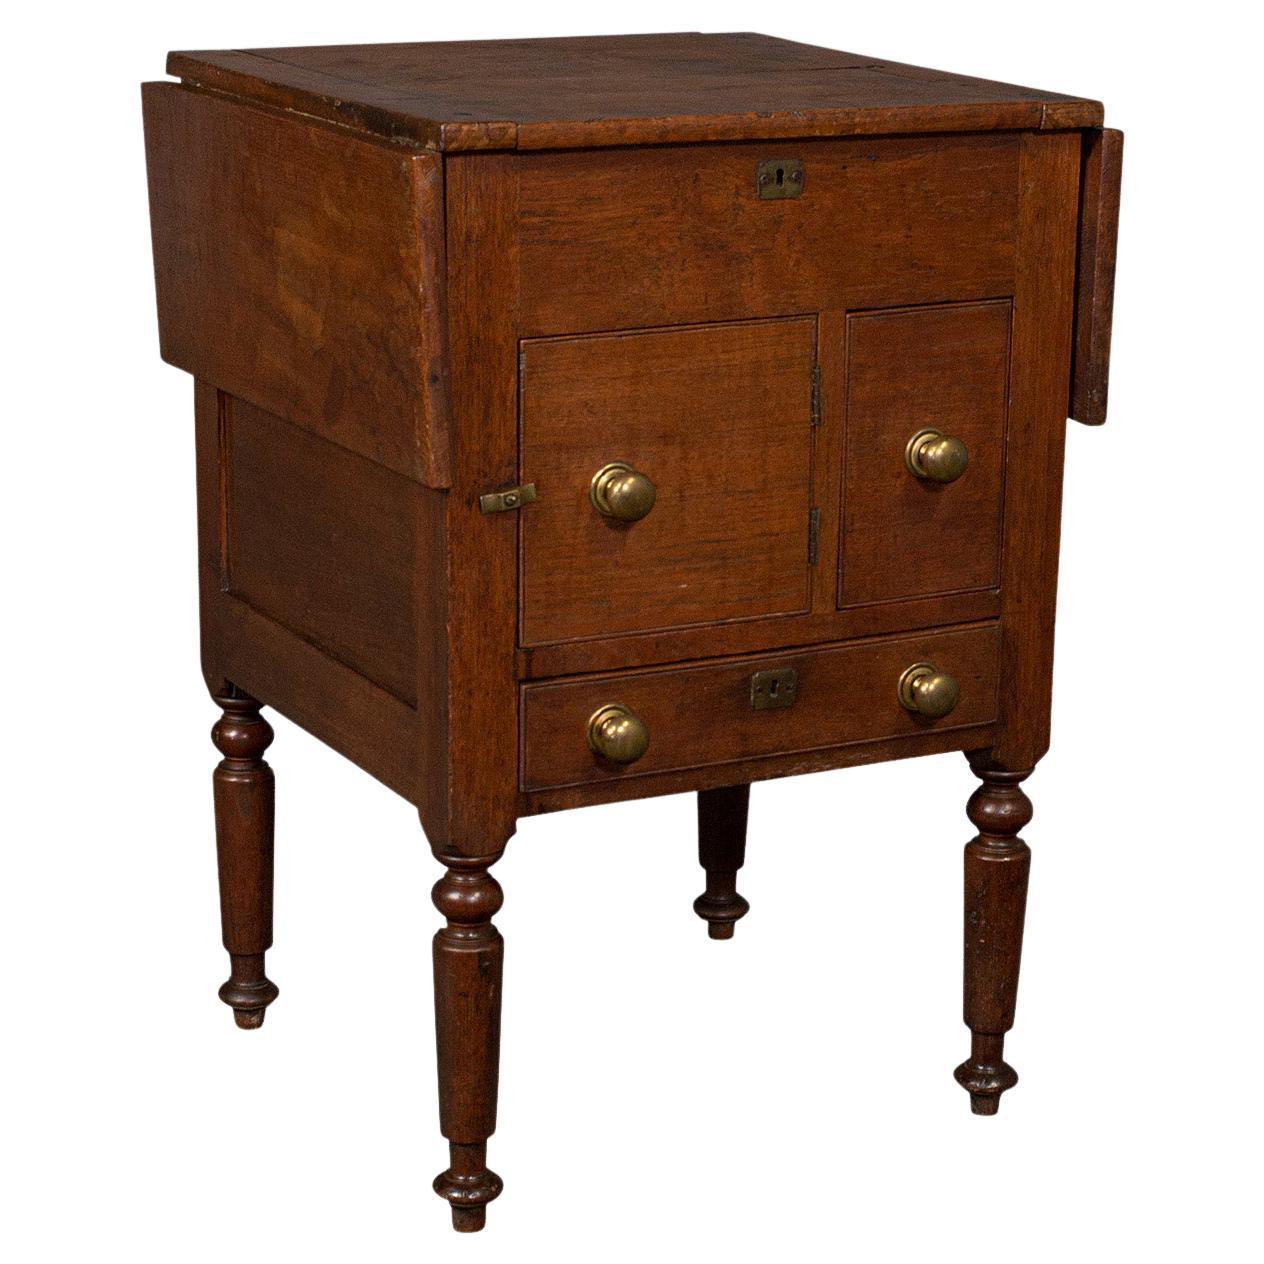 Antique Ship's Wash Stand, English, Drop Flap Nightstand, Victorian, Circa 1850 For Sale